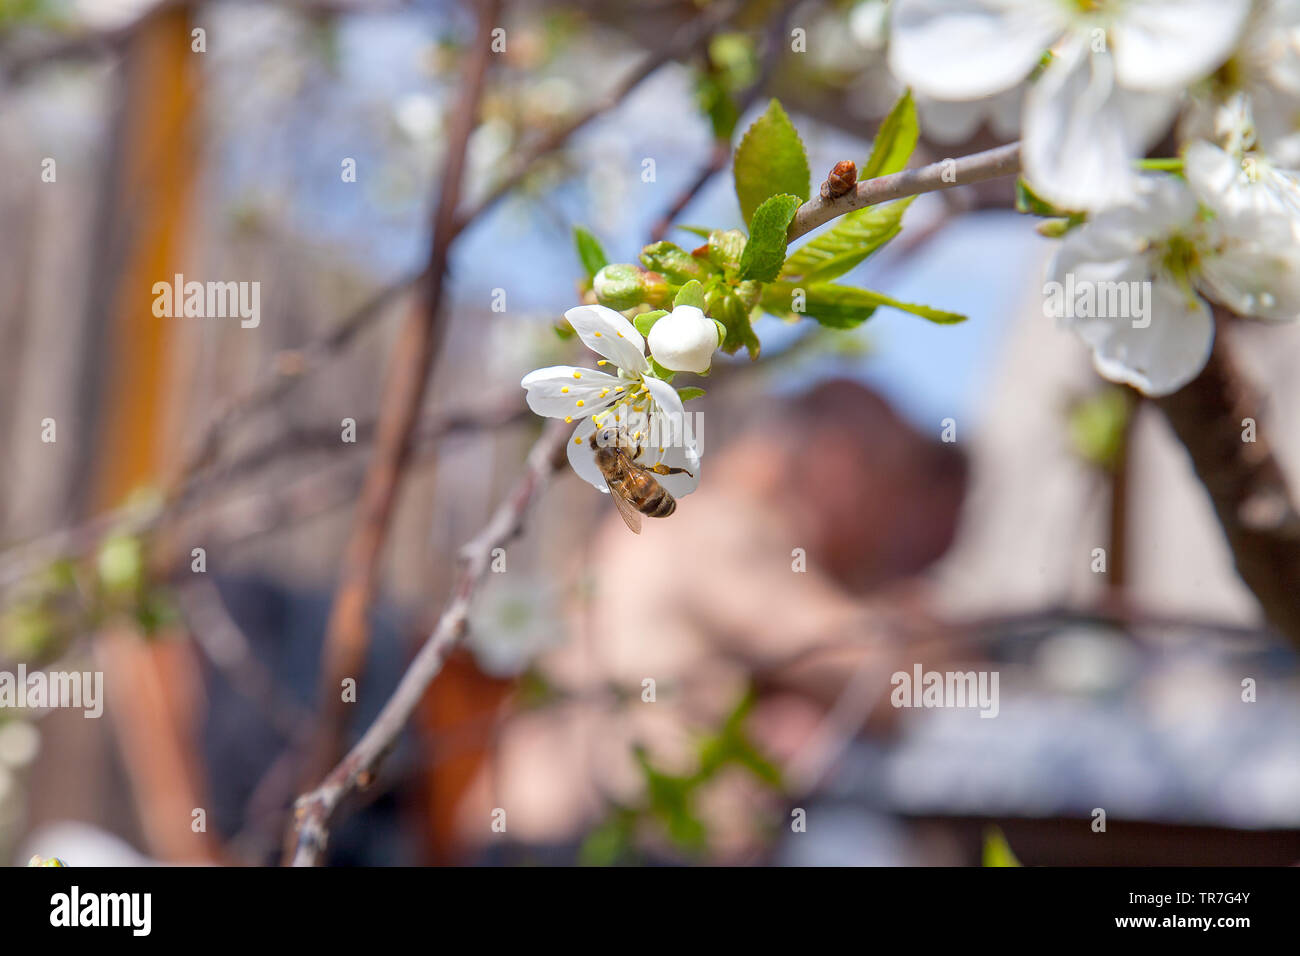 Orchard at spring time. Close up view of honeybee on white flower of cherry tree blossoms collecting pollen and nectar to make sweet honey. Small gree Stock Photo